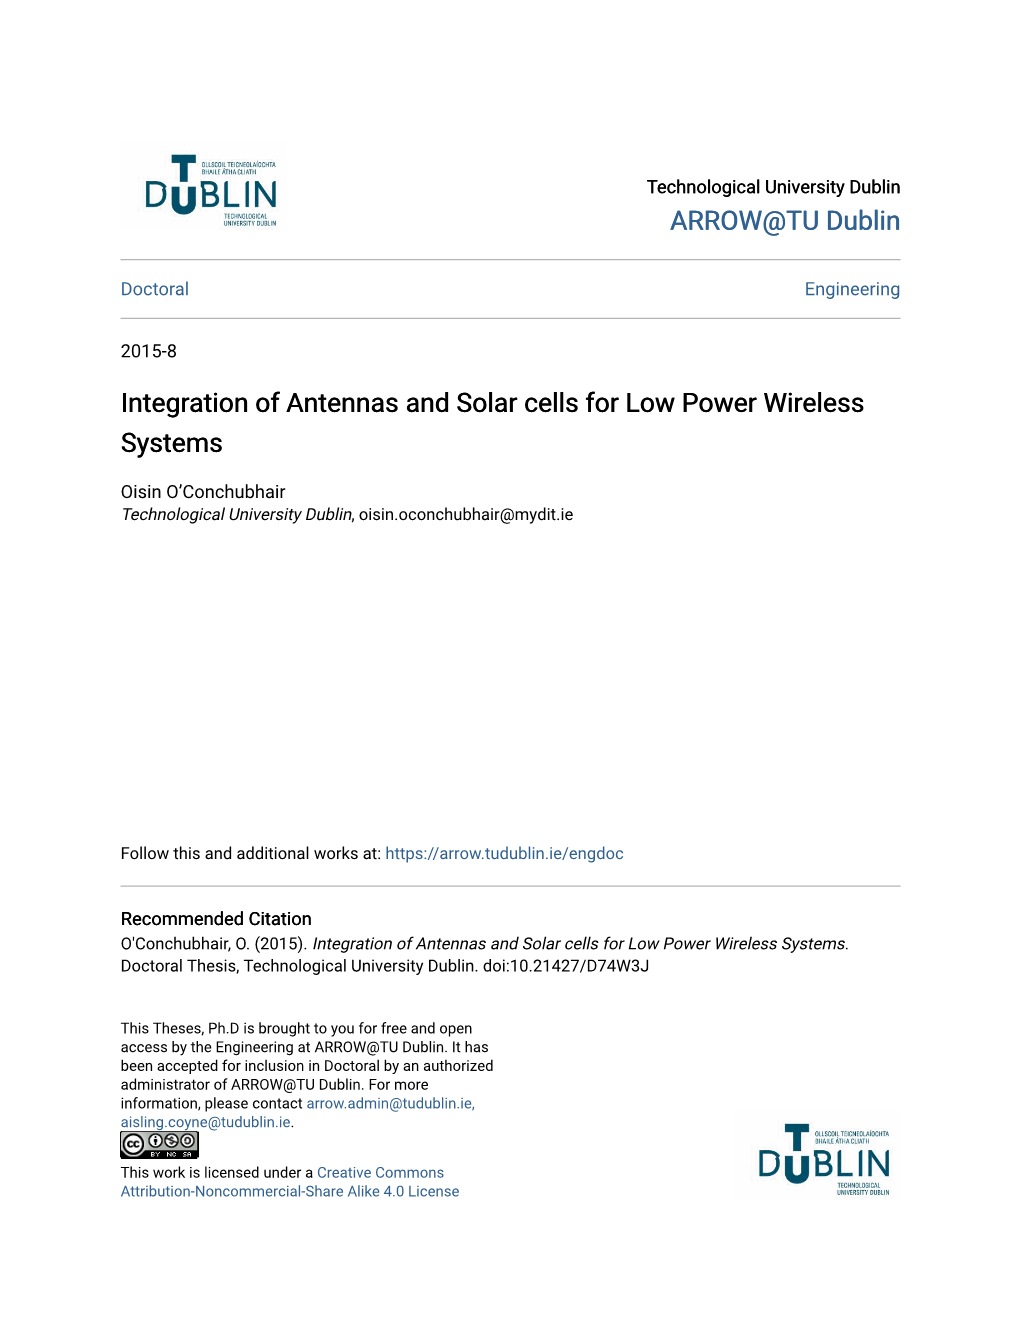 Integration of Antennas and Solar Cells for Low Power Wireless Systems